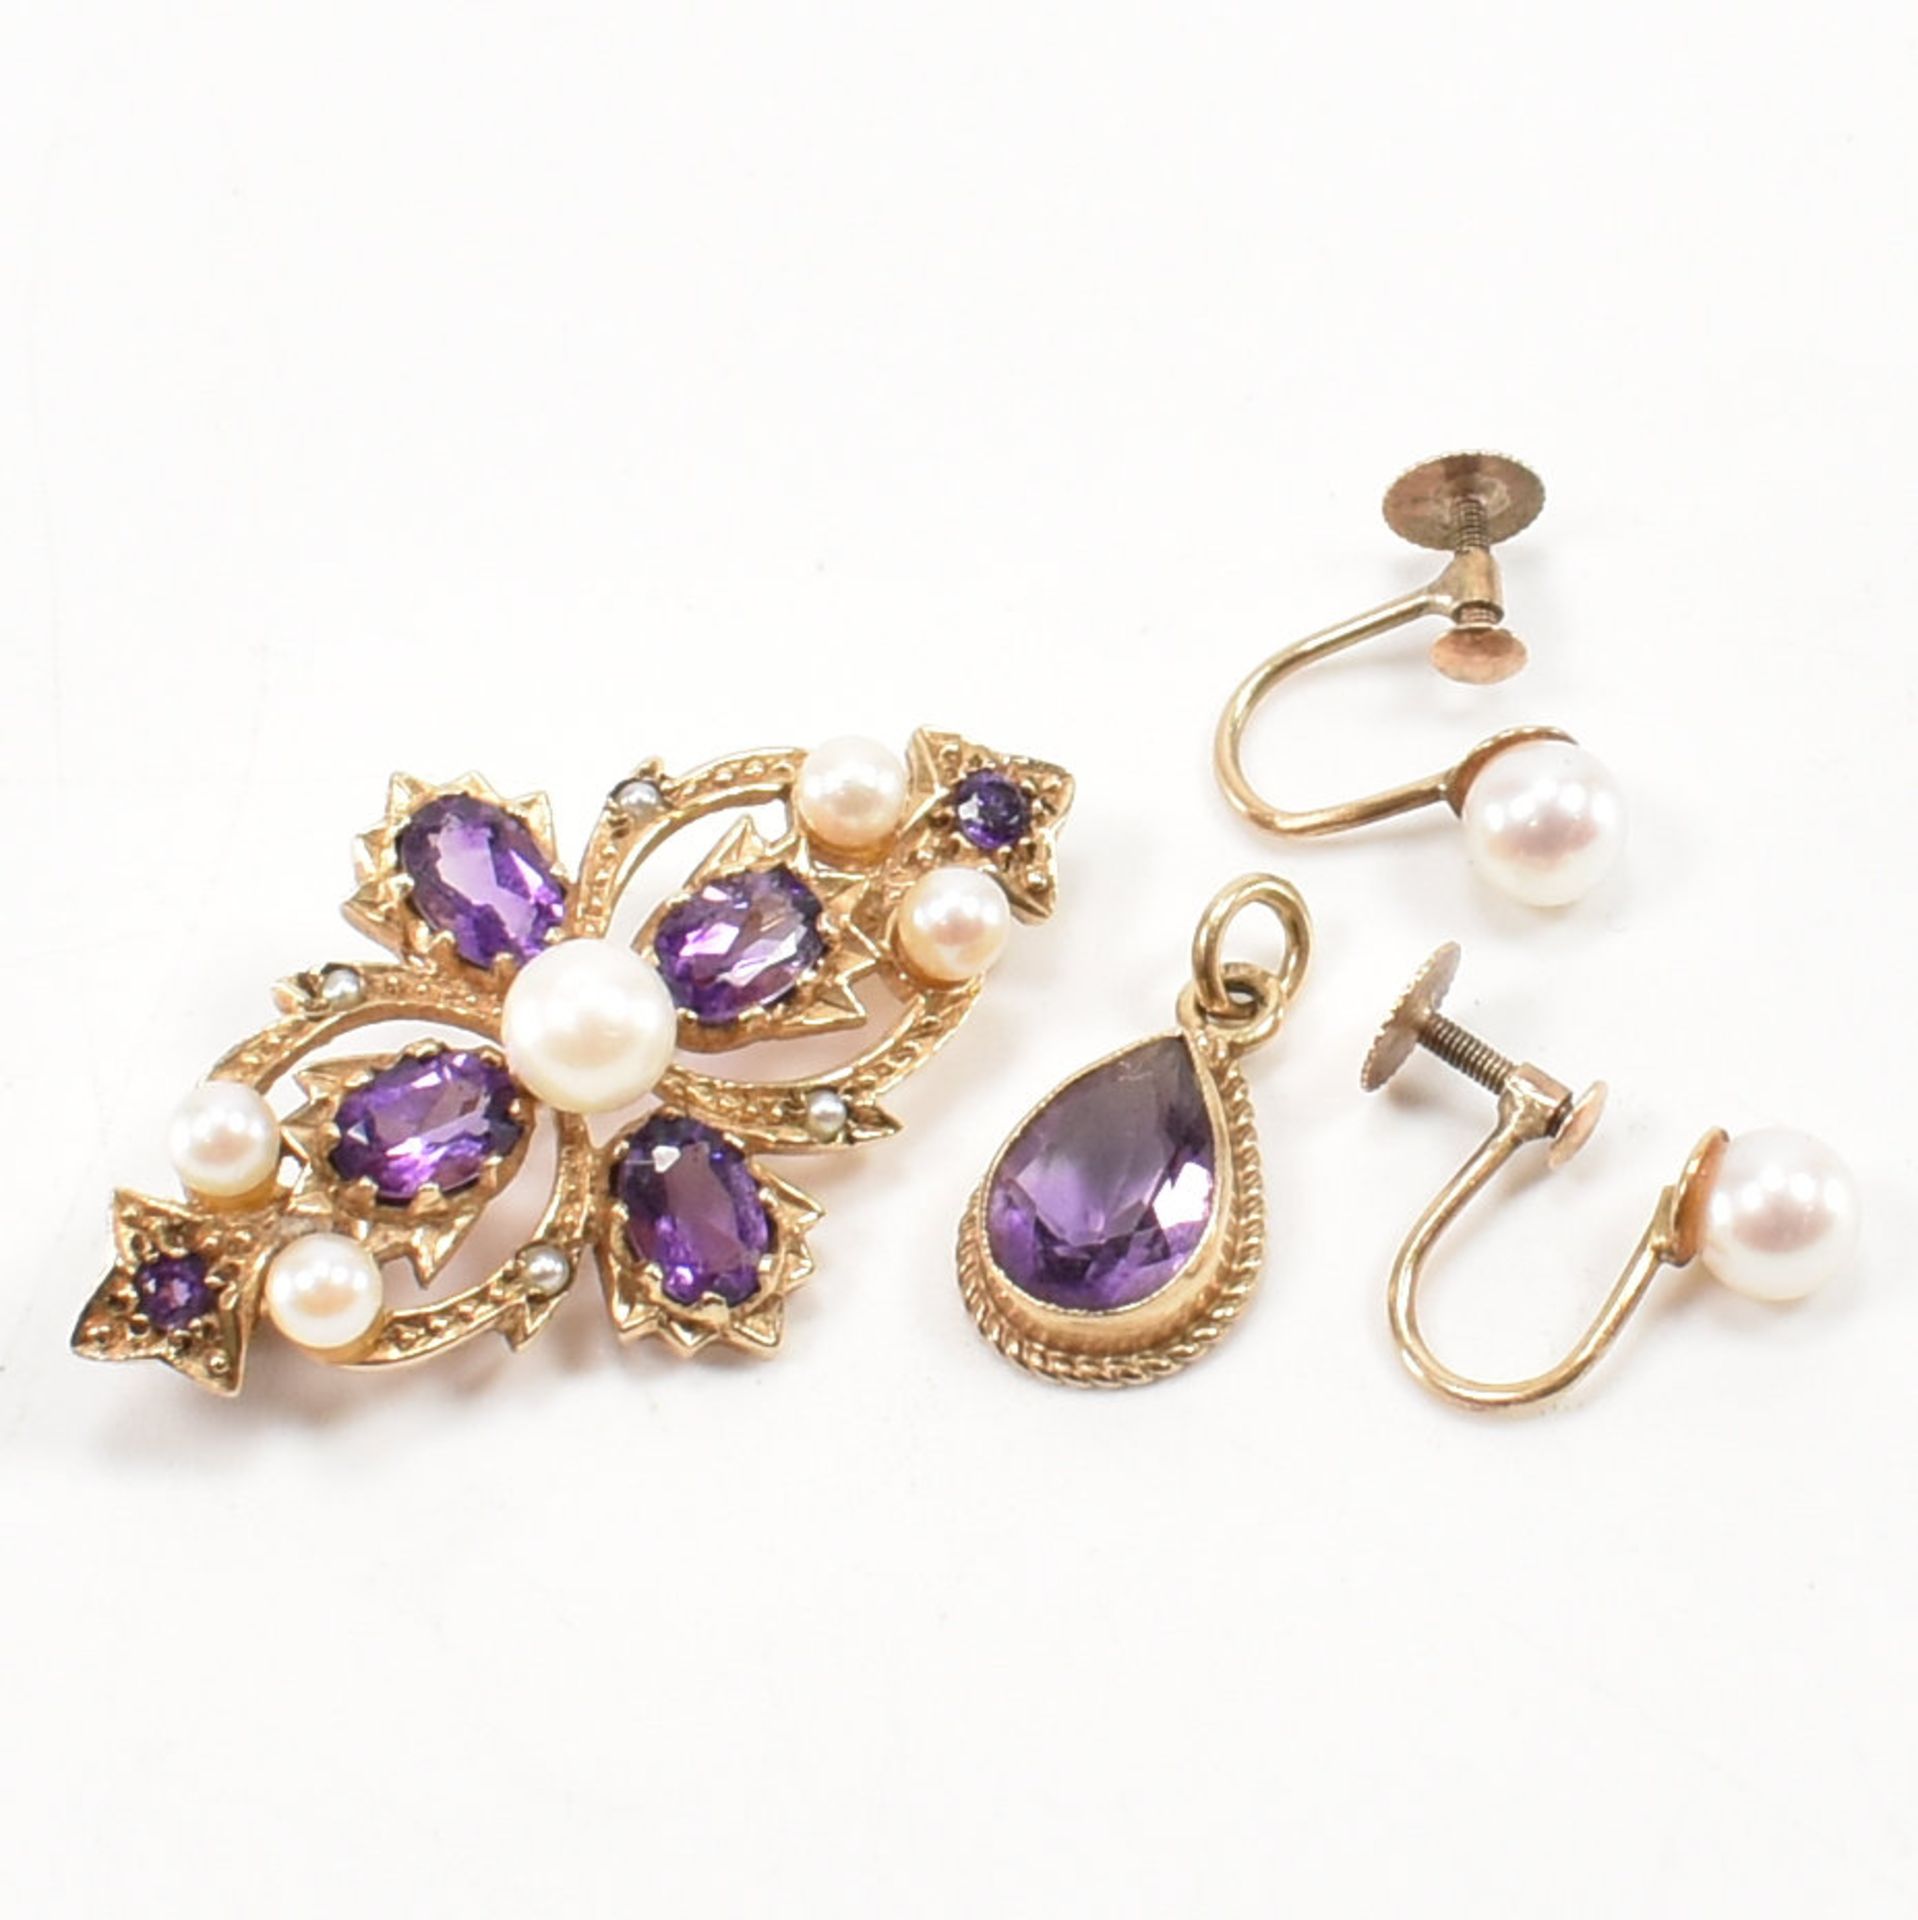 COLLECTION OF 9CT GOLD PEARL & AMETHYST JEWELLERY